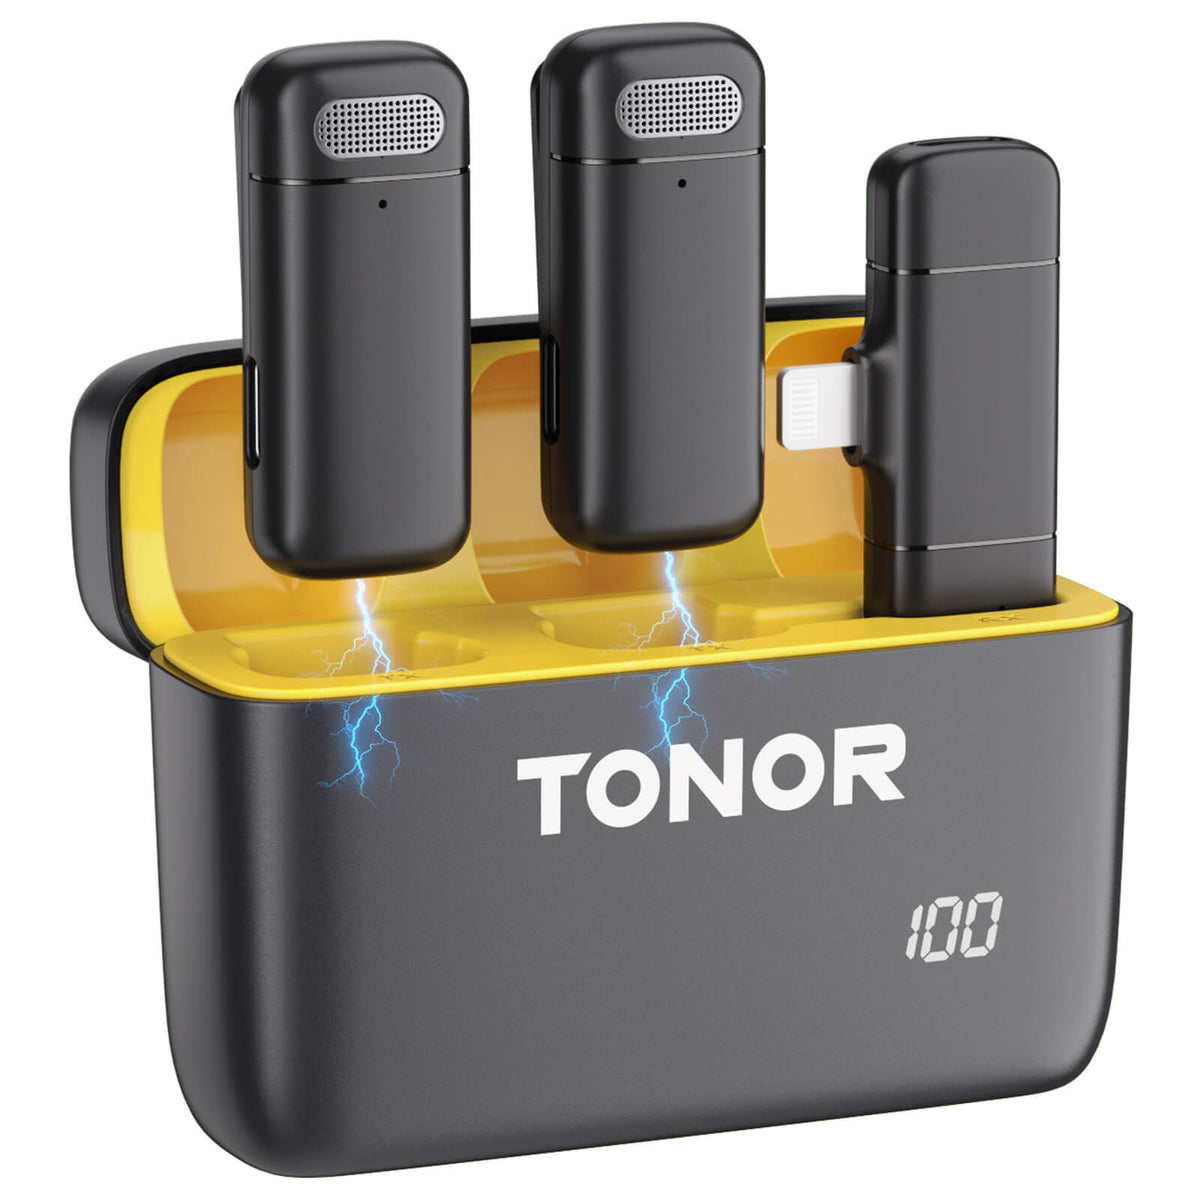 TONOR Wireless Lavalier Microphones for iPhone/iPad/Android Phone